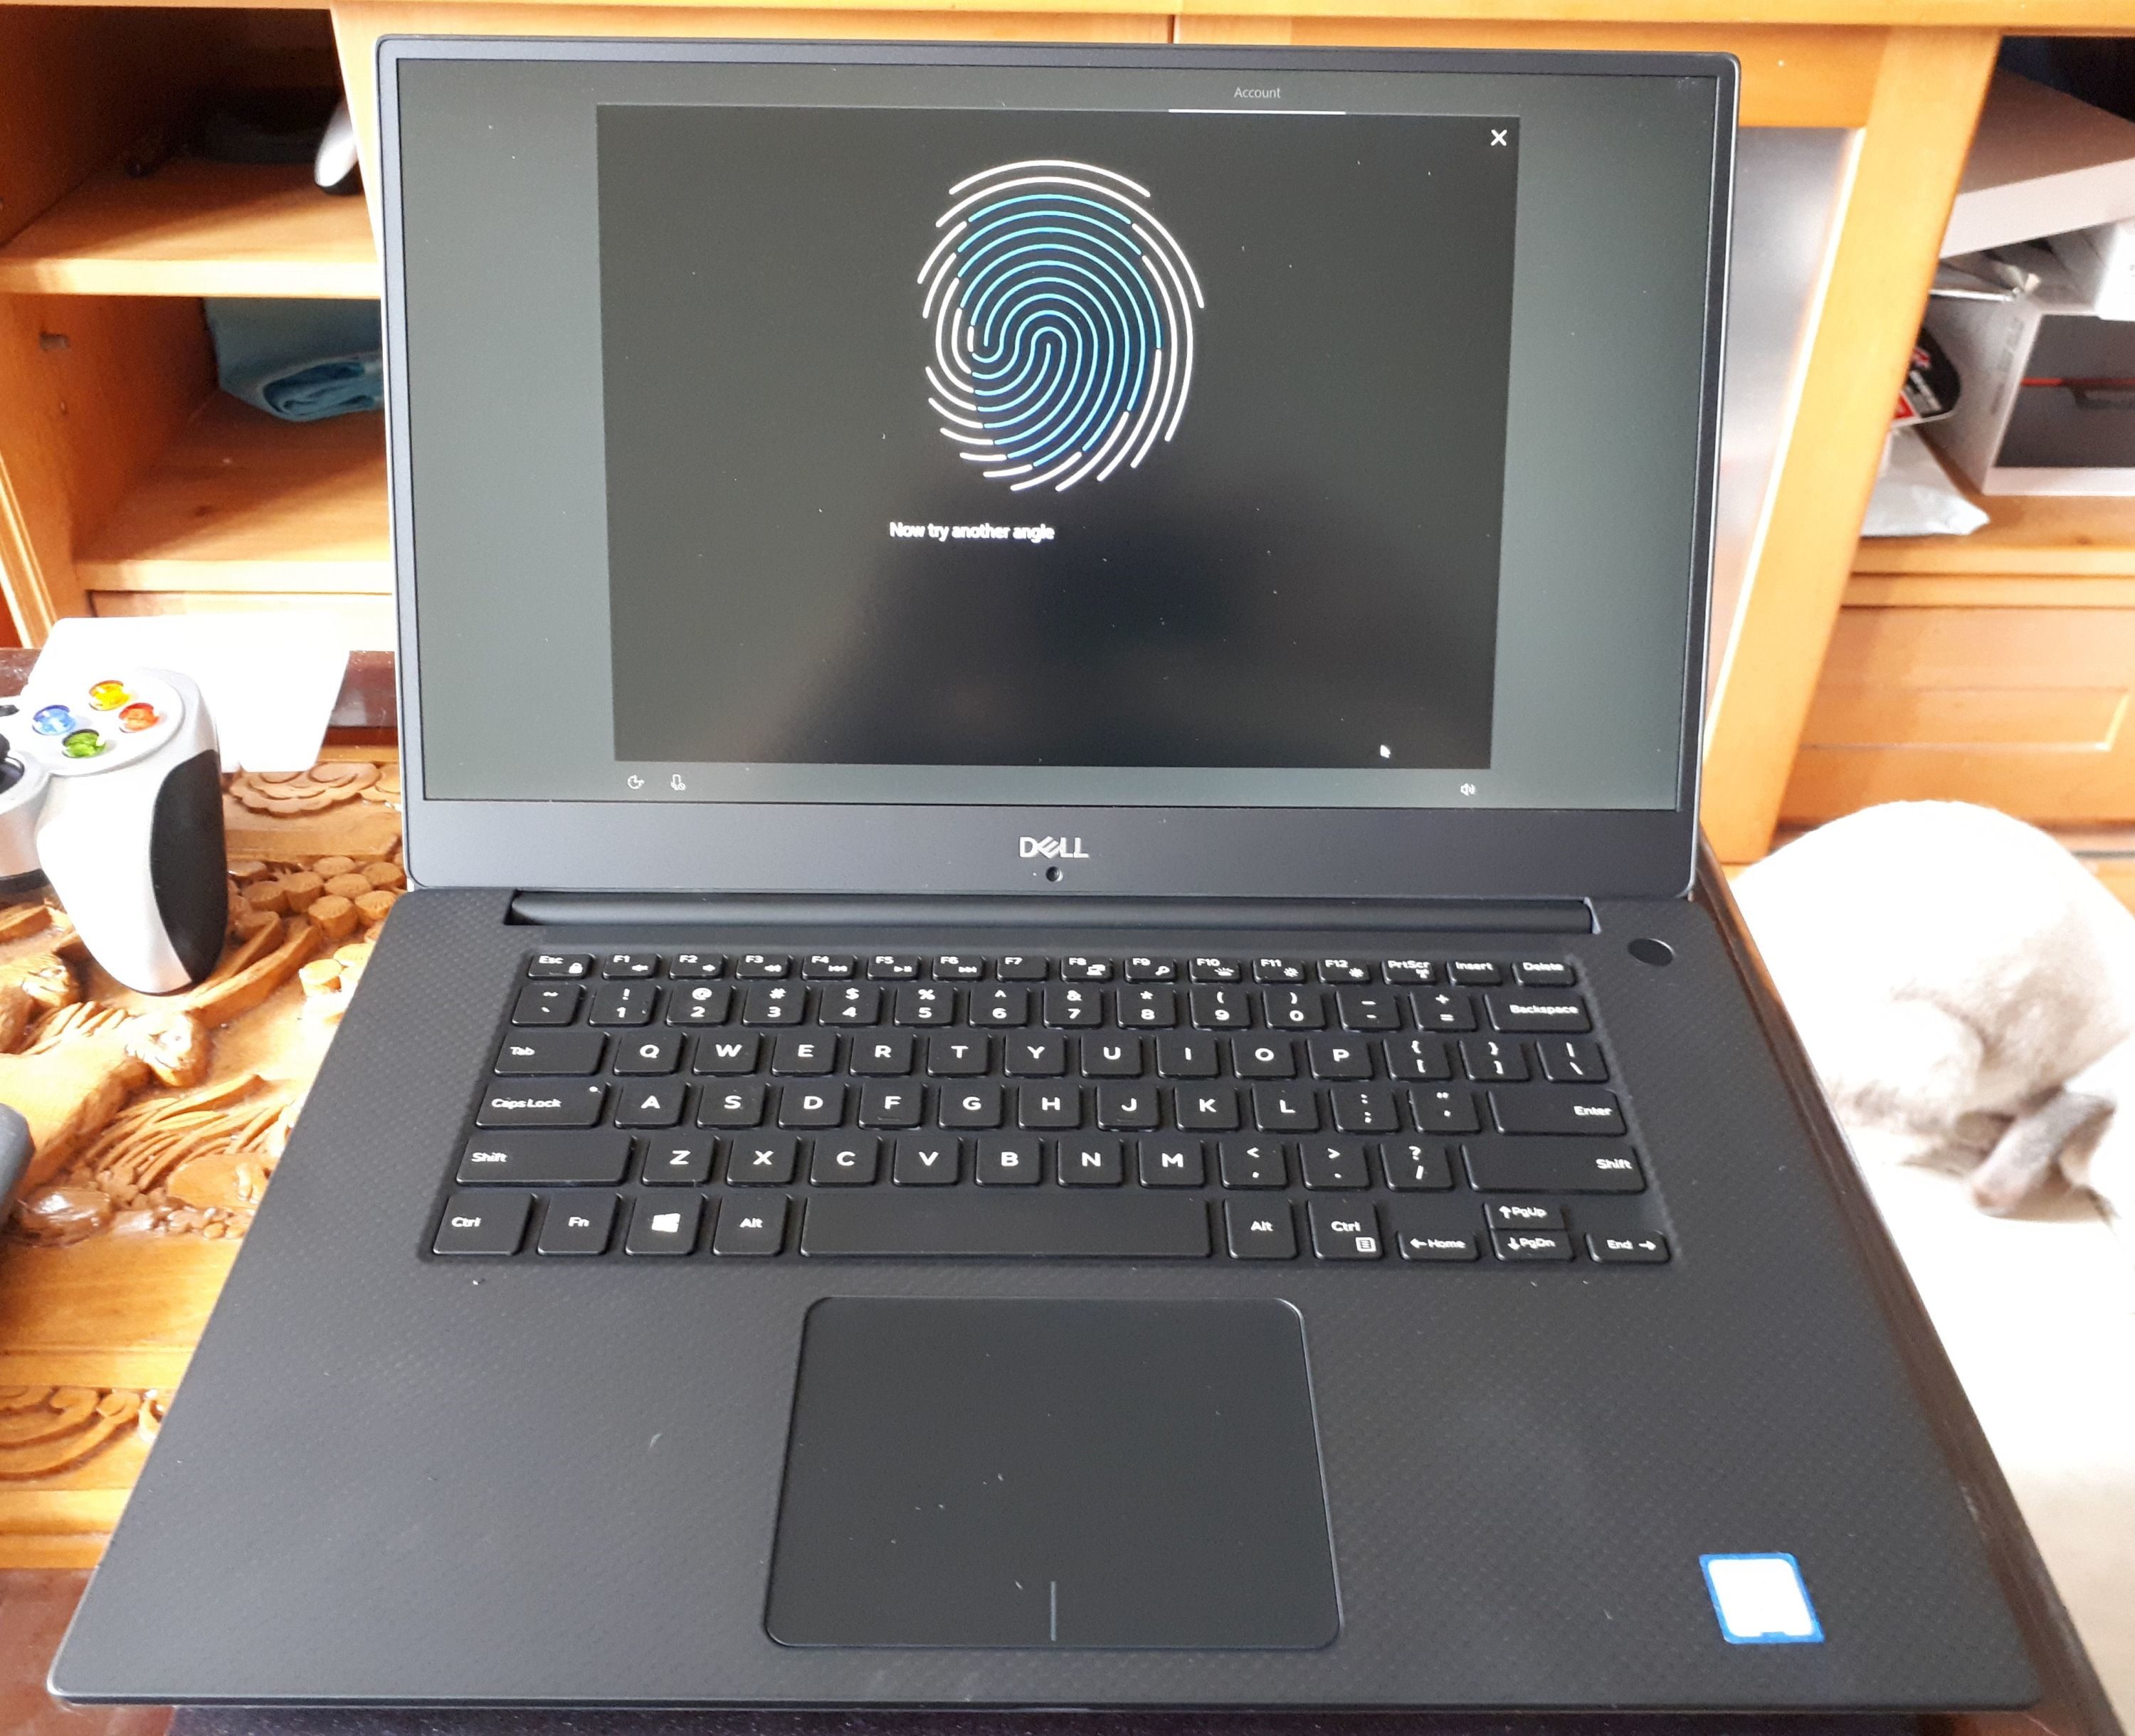 Dell 9570 (i7-8750H, 1050 Ti Max-Q, FHD screen) — completed